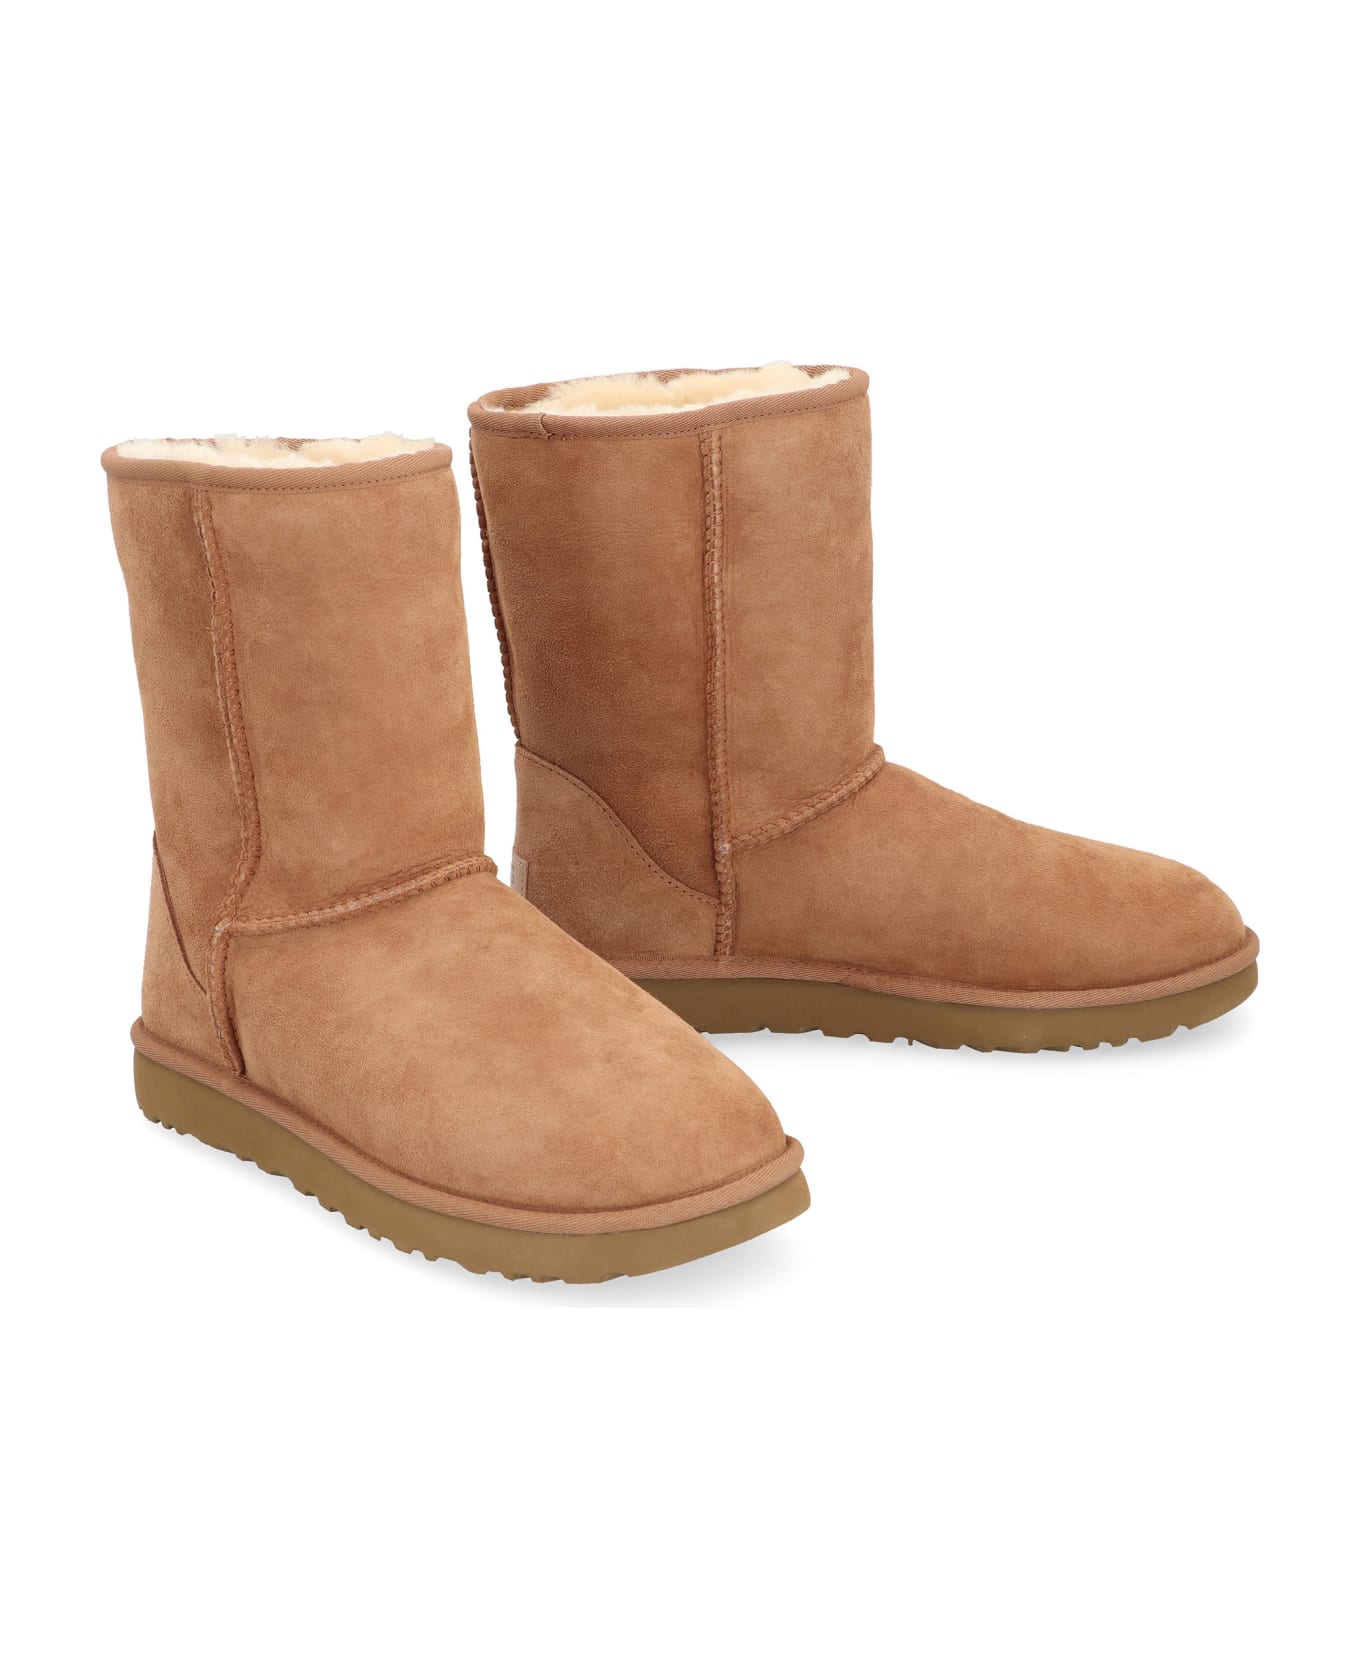 UGG Classic Short Ii Ankle Boots - CHESTNUT ブーツ